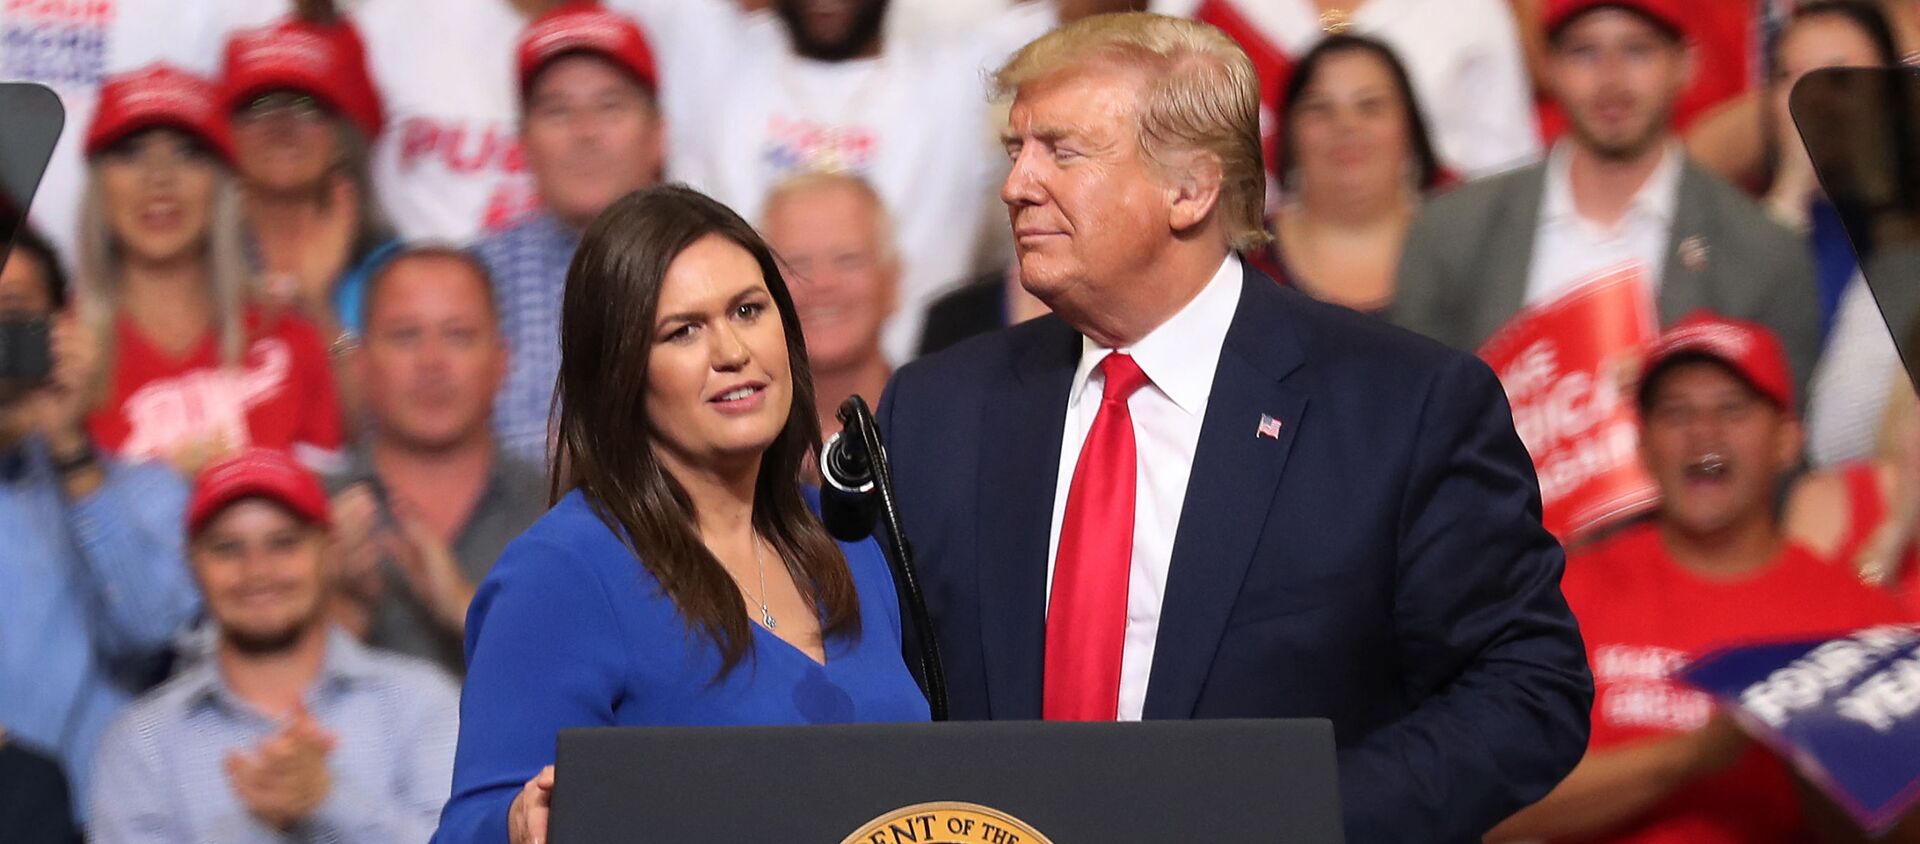  JUNE 18: U.S. President Donald Trump stands with Sarah Huckabee Sanders, who announced that she is stepping down as the White House press secretary, during his rally where he announced his candidacy for a second presidential term at the Amway Center on June 18, 2019 in Orlando, Florida - Sputnik International, 1920, 15.03.2021